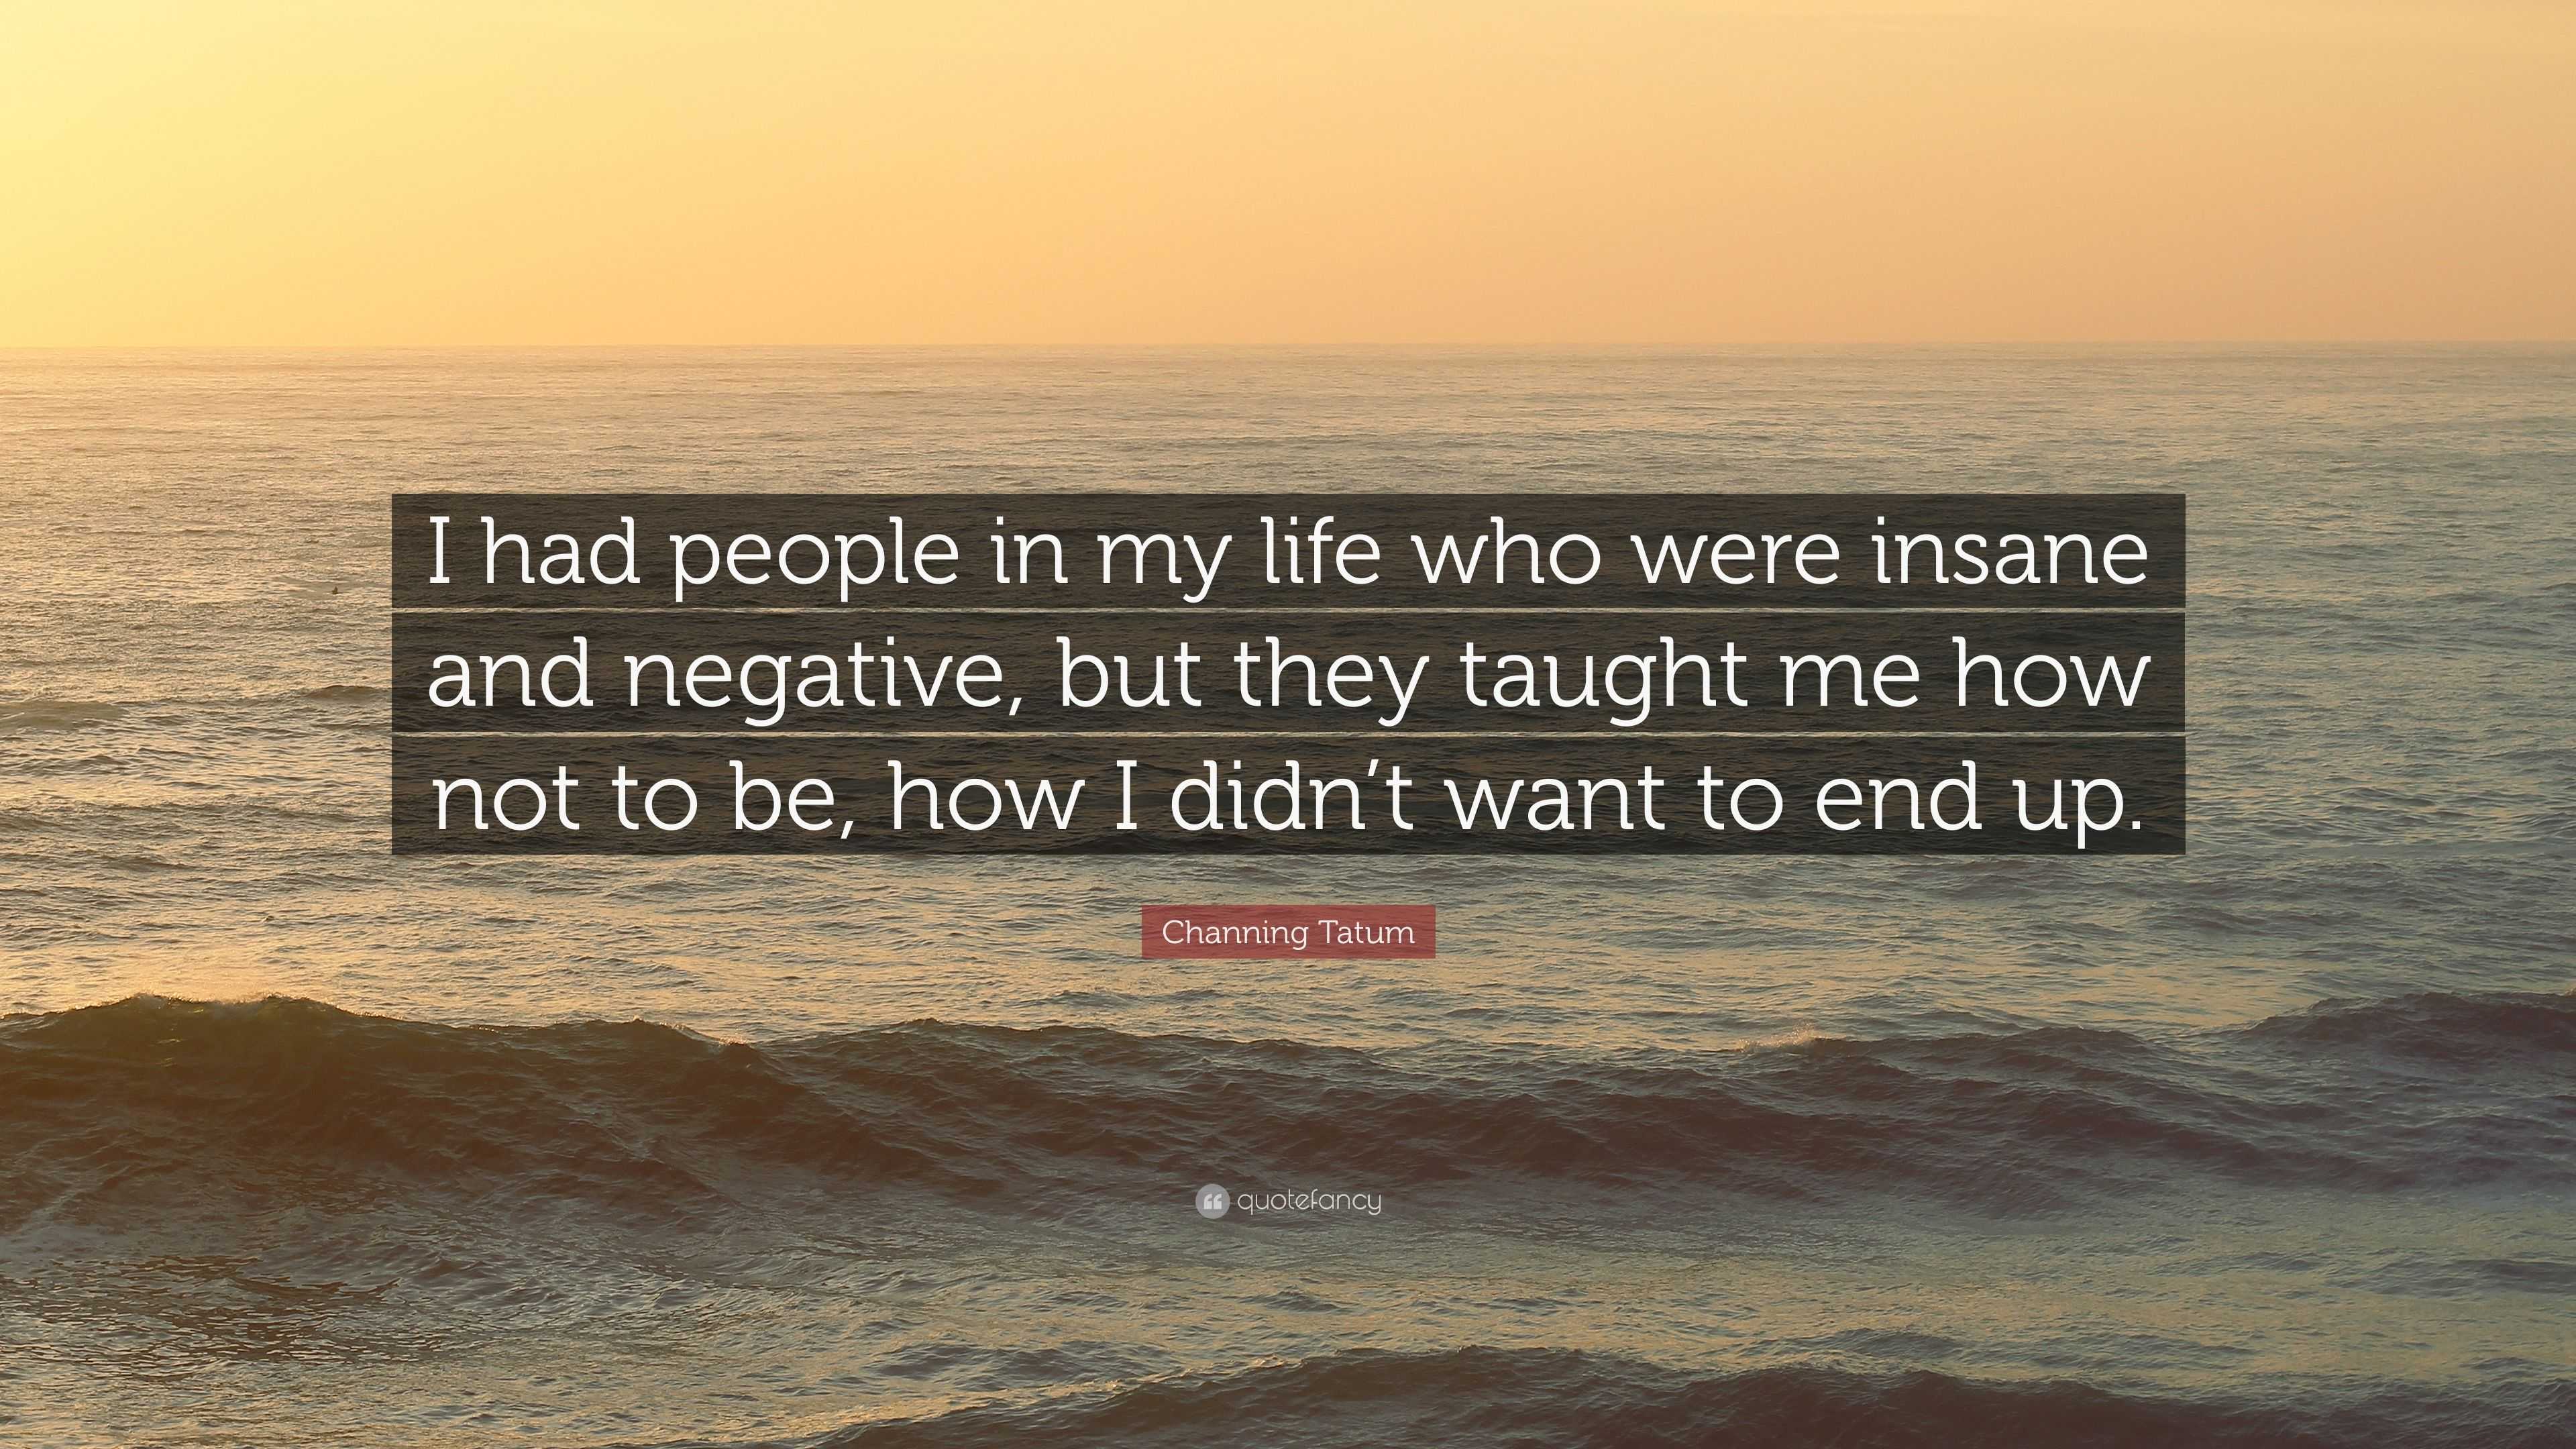 Channing Tatum Quote “I had people in my life who were insane and negative